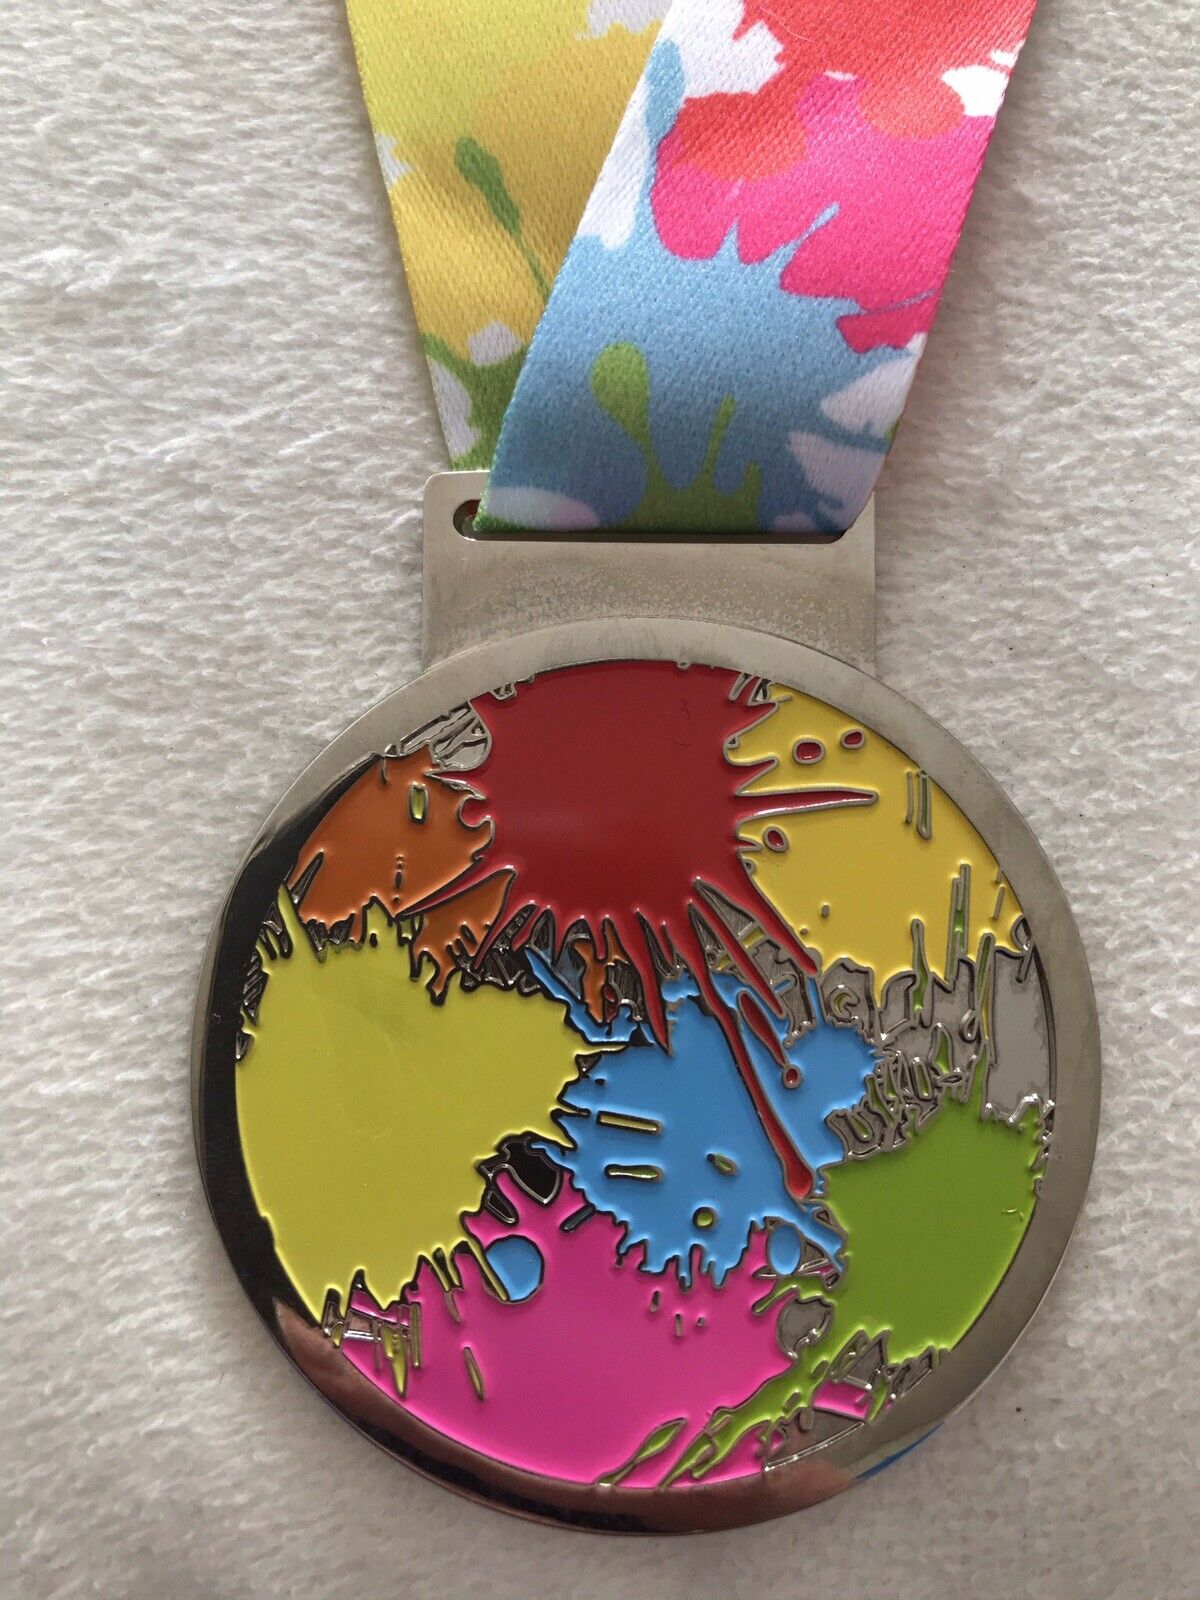 COLOUR BRIGHT Virtual Medal Challenge Run Walk Any Distance